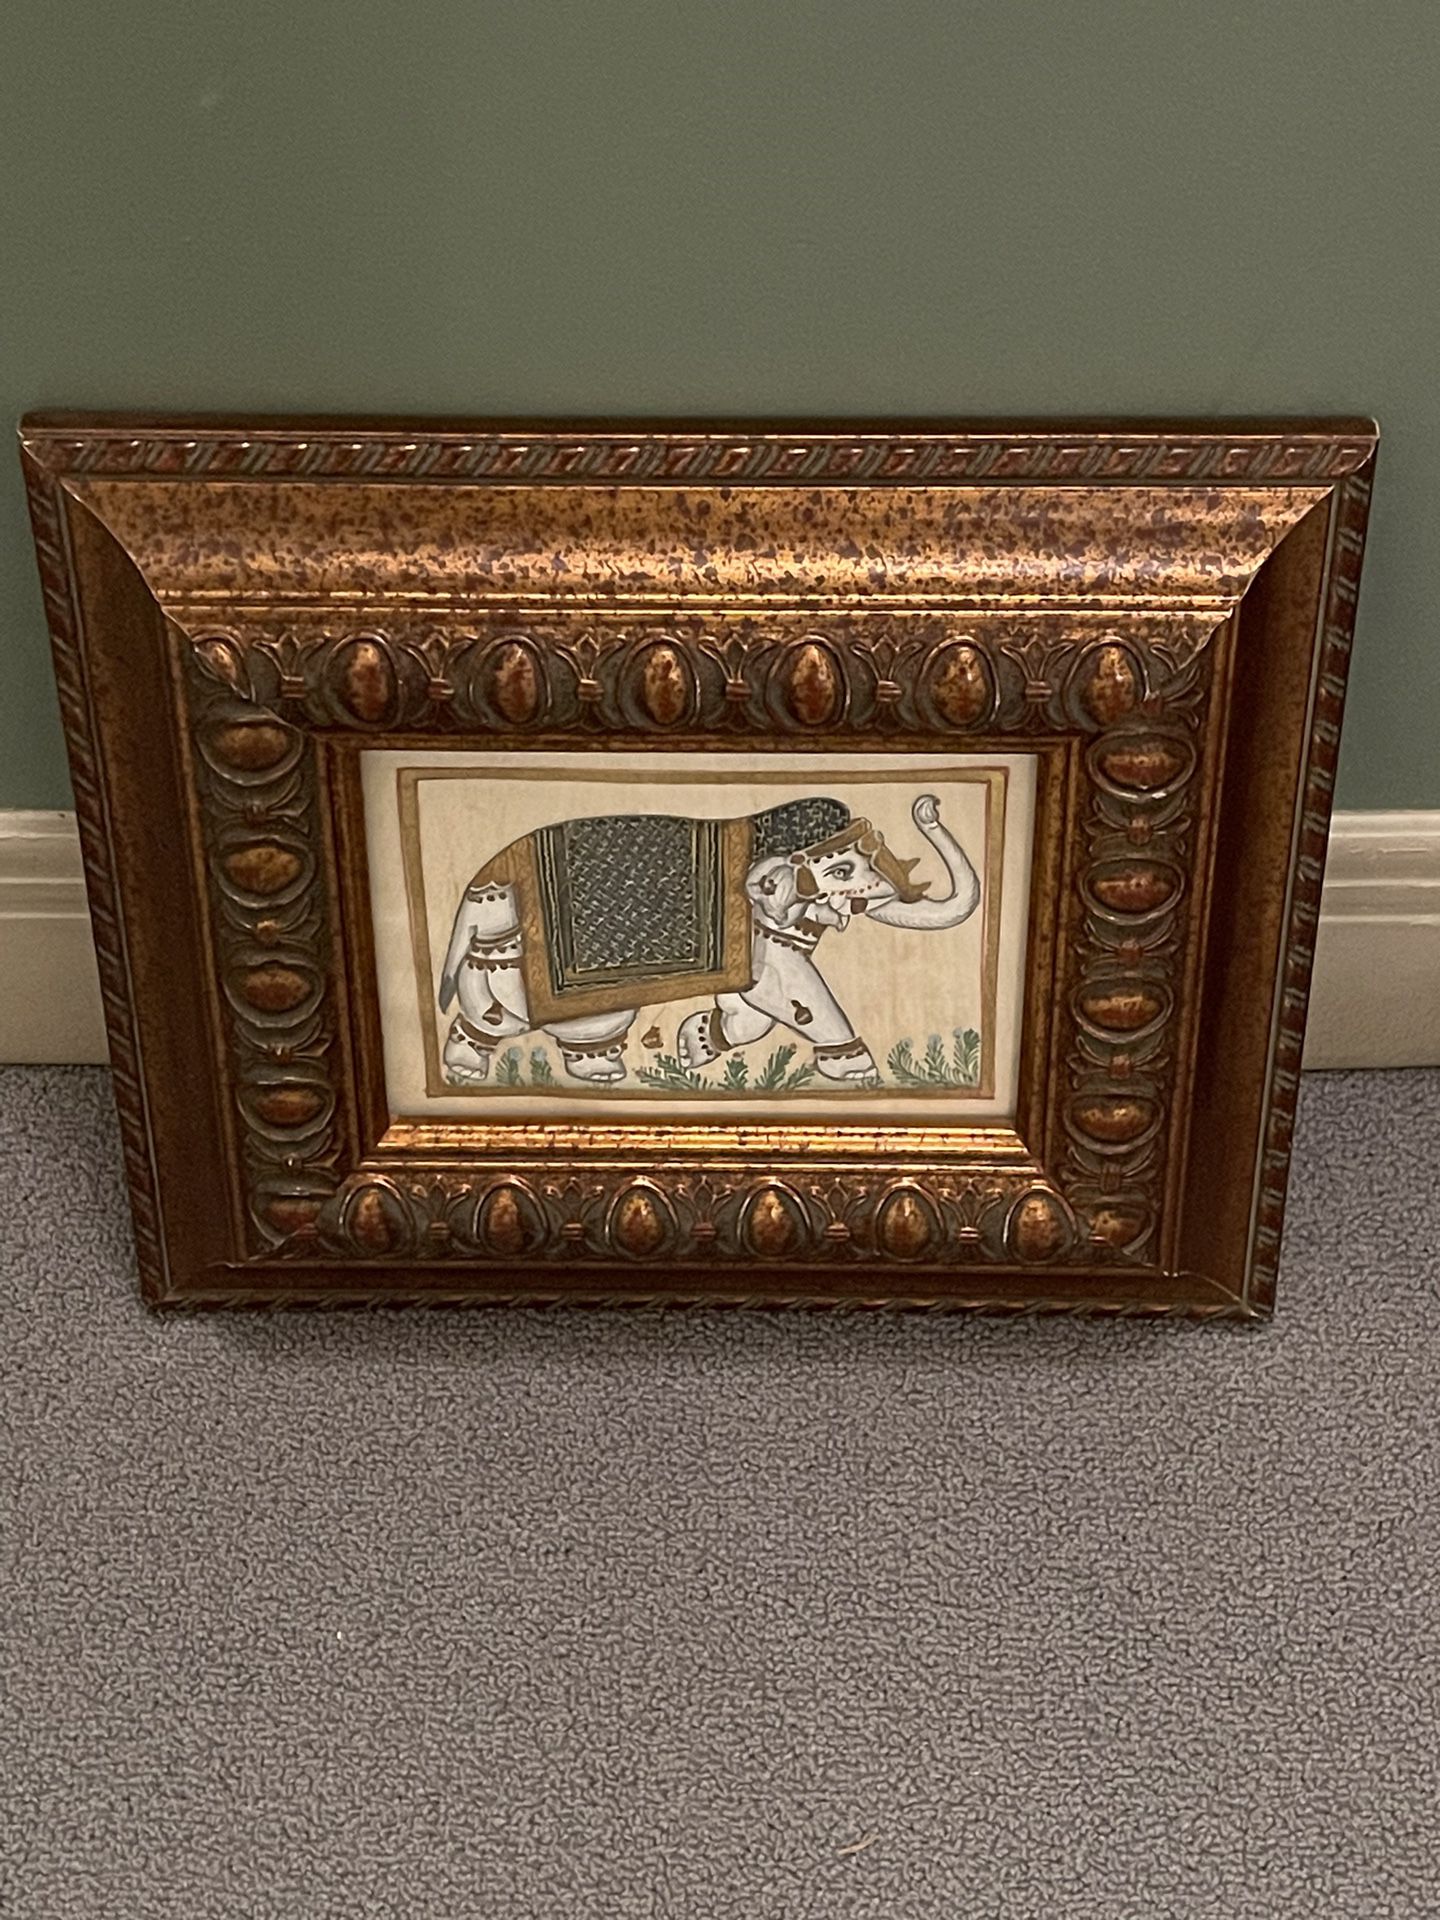 Iconic ELEPHANT etched w/Gold Leaf on Fine Silk & Framed in ORNATE WOOD (2 available) - firm price EACH